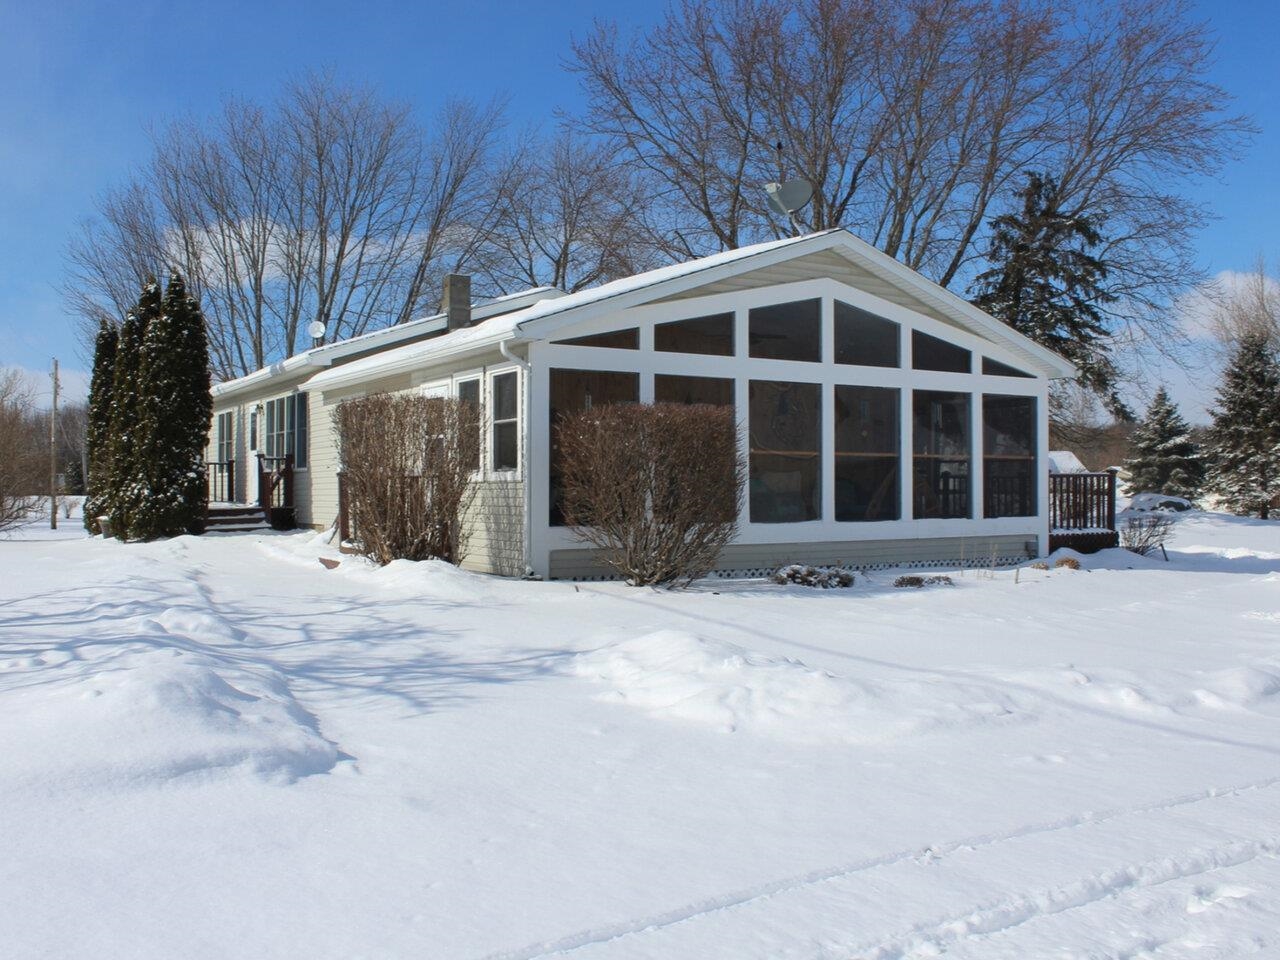 Sold property in Swanton